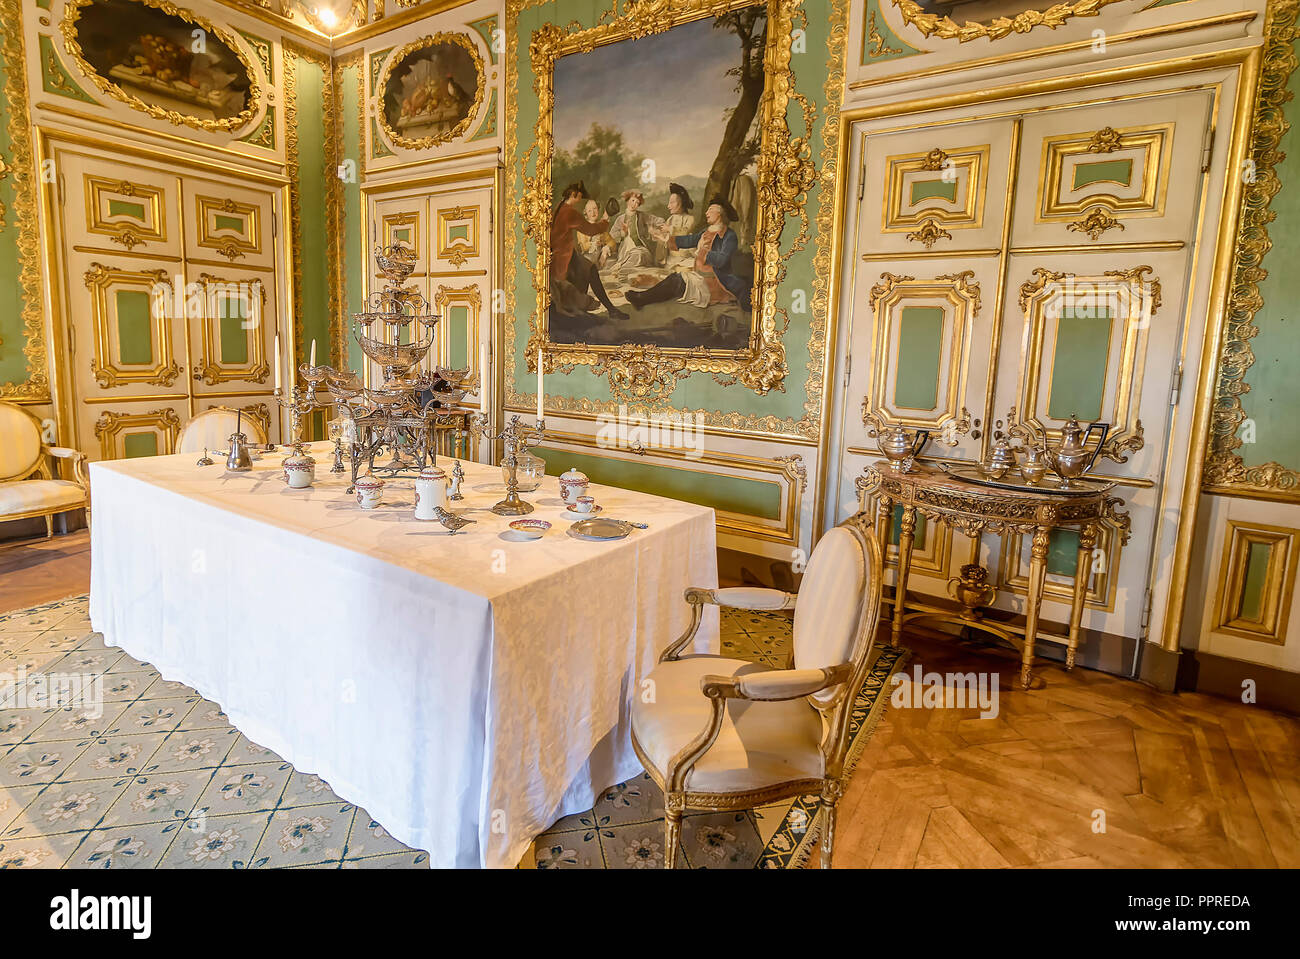 Queluz, Portugal - December 9, 2017: Vintage table setting with teacup inside of rich decorated Queluz Royal Palace. Formerly used as the Summer resid Stock Photo